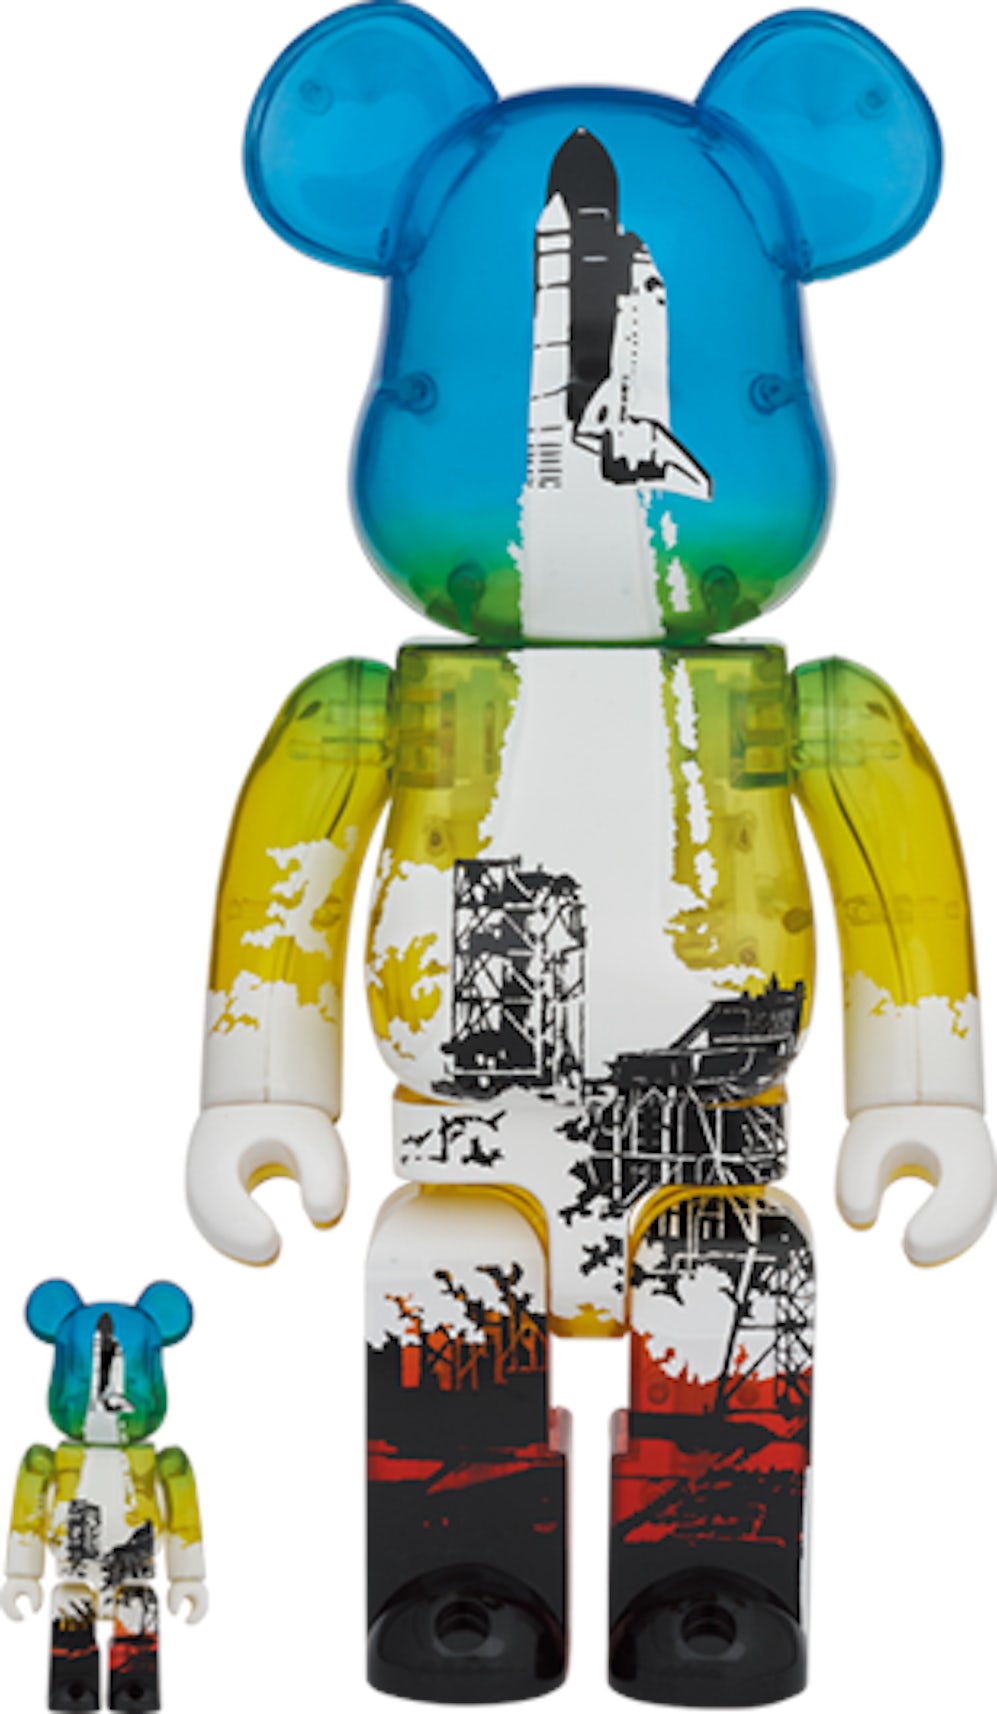 SPACE SHUTTLE BE@RBRICK LAUNCHフィギュア